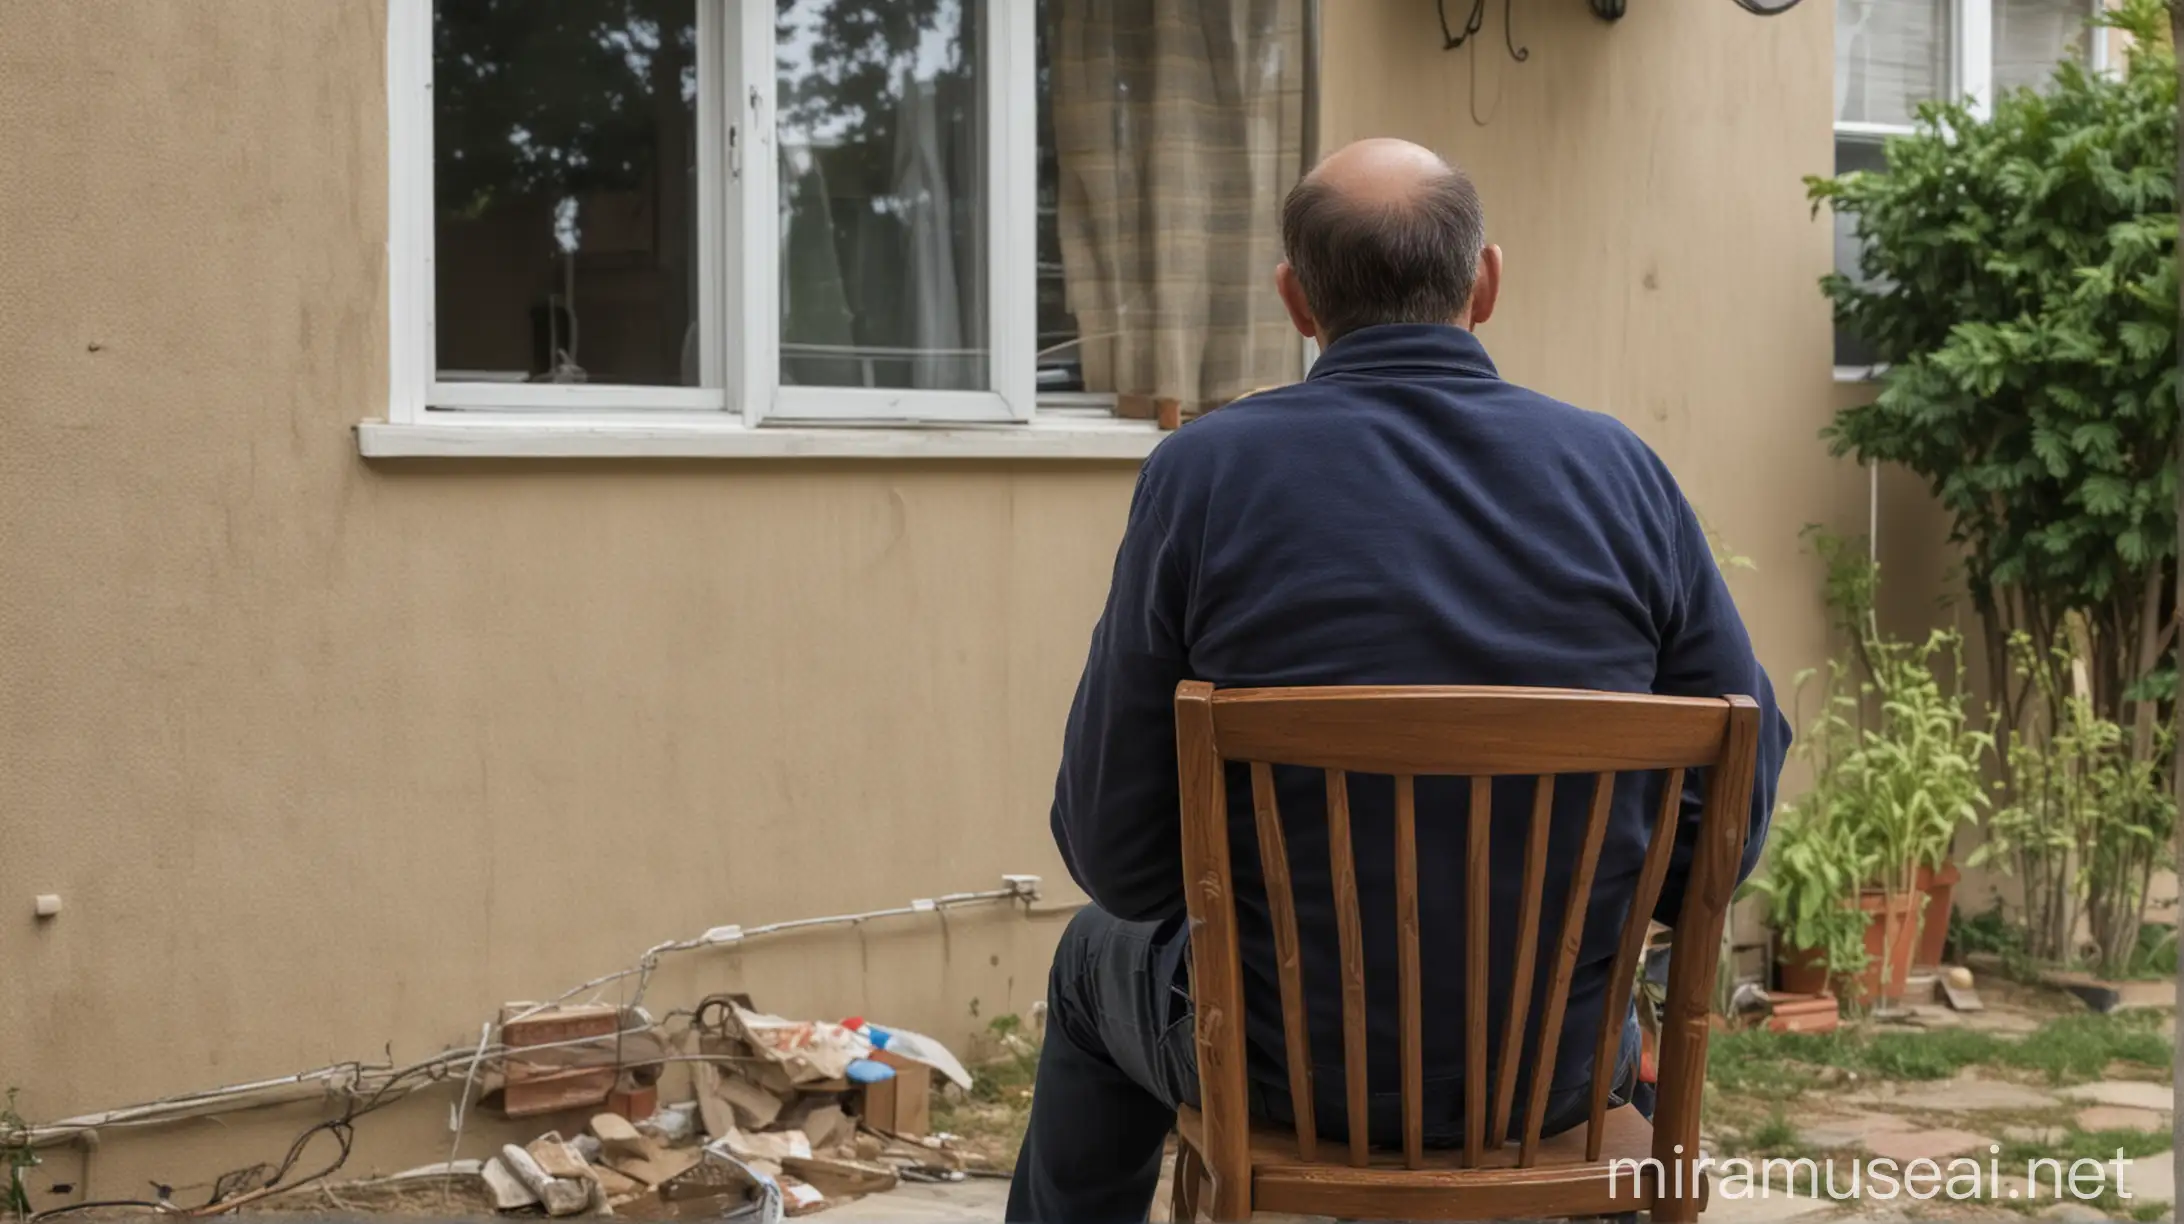 A 46 year old man sitting on a chair, in front of a house, shot from behind, long shot